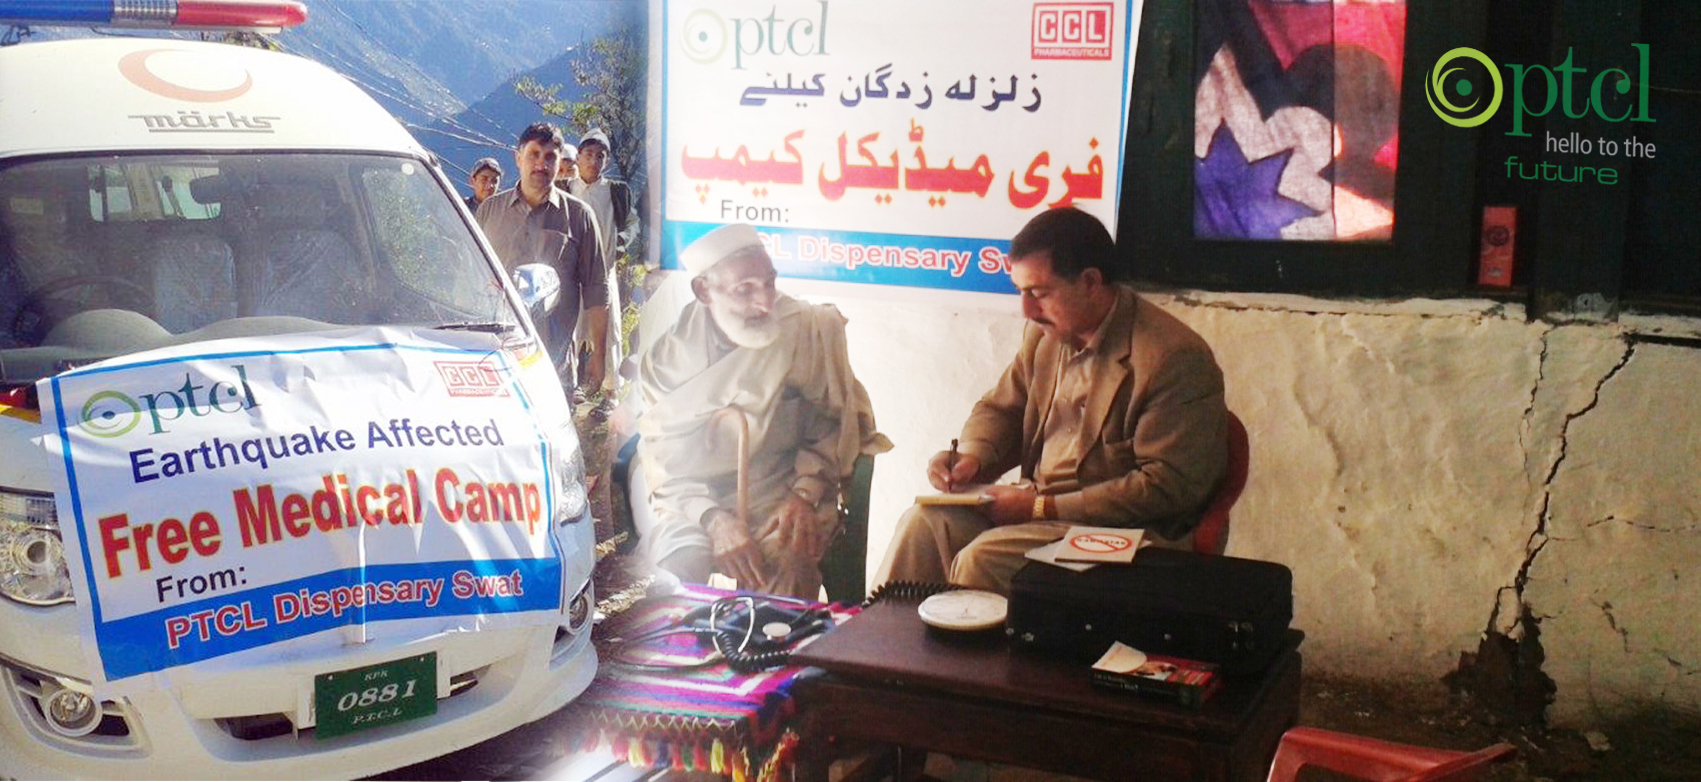 PTCL provides medical relief in earthquake hit areas